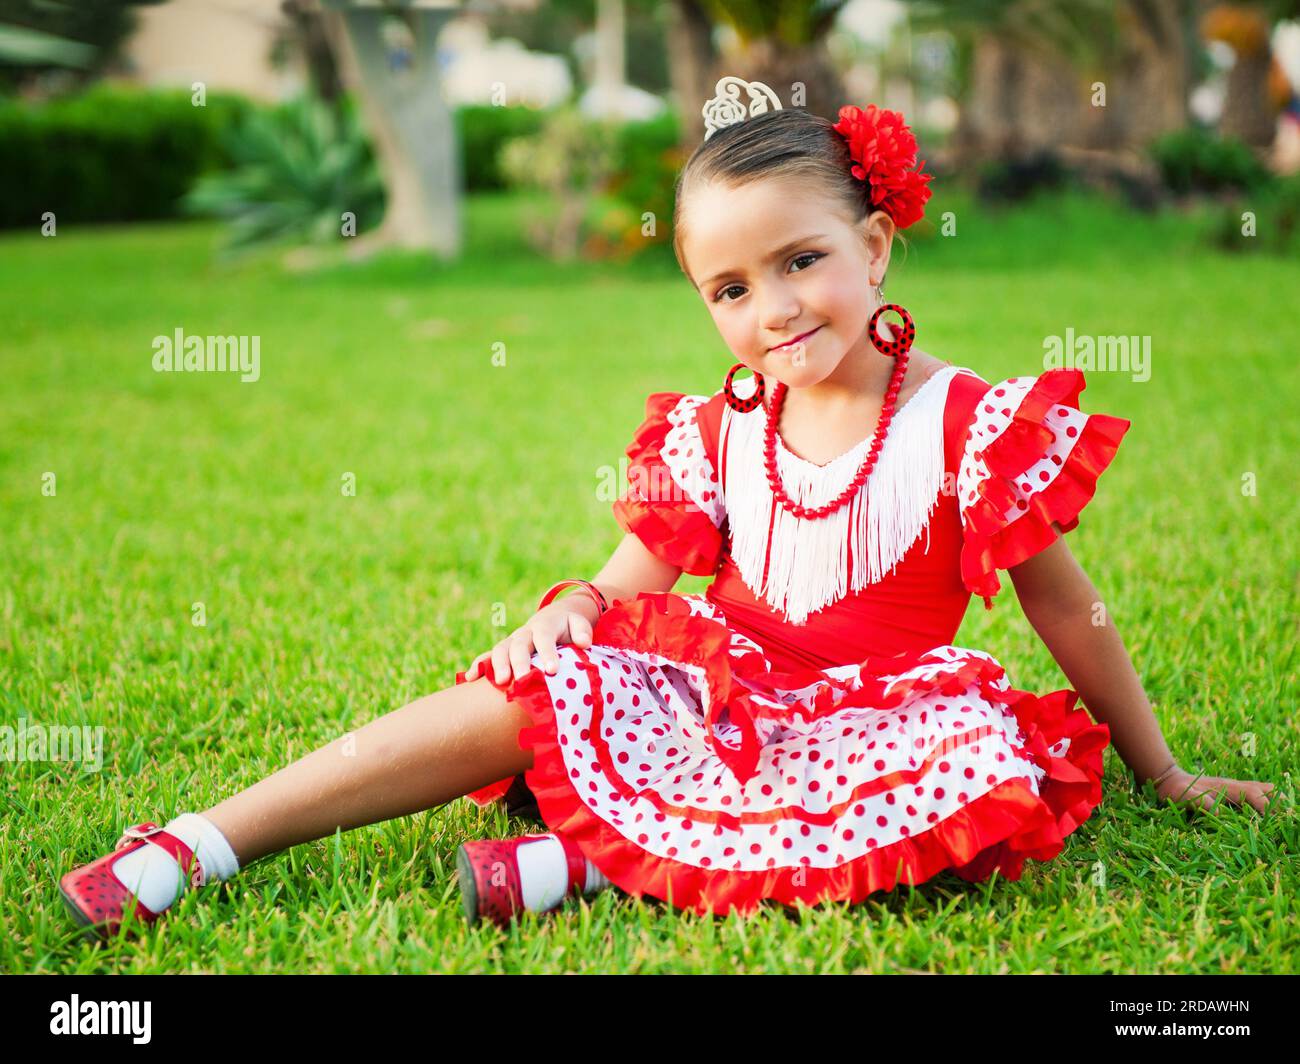 Girl in dress with its traditional nature Stock Photo